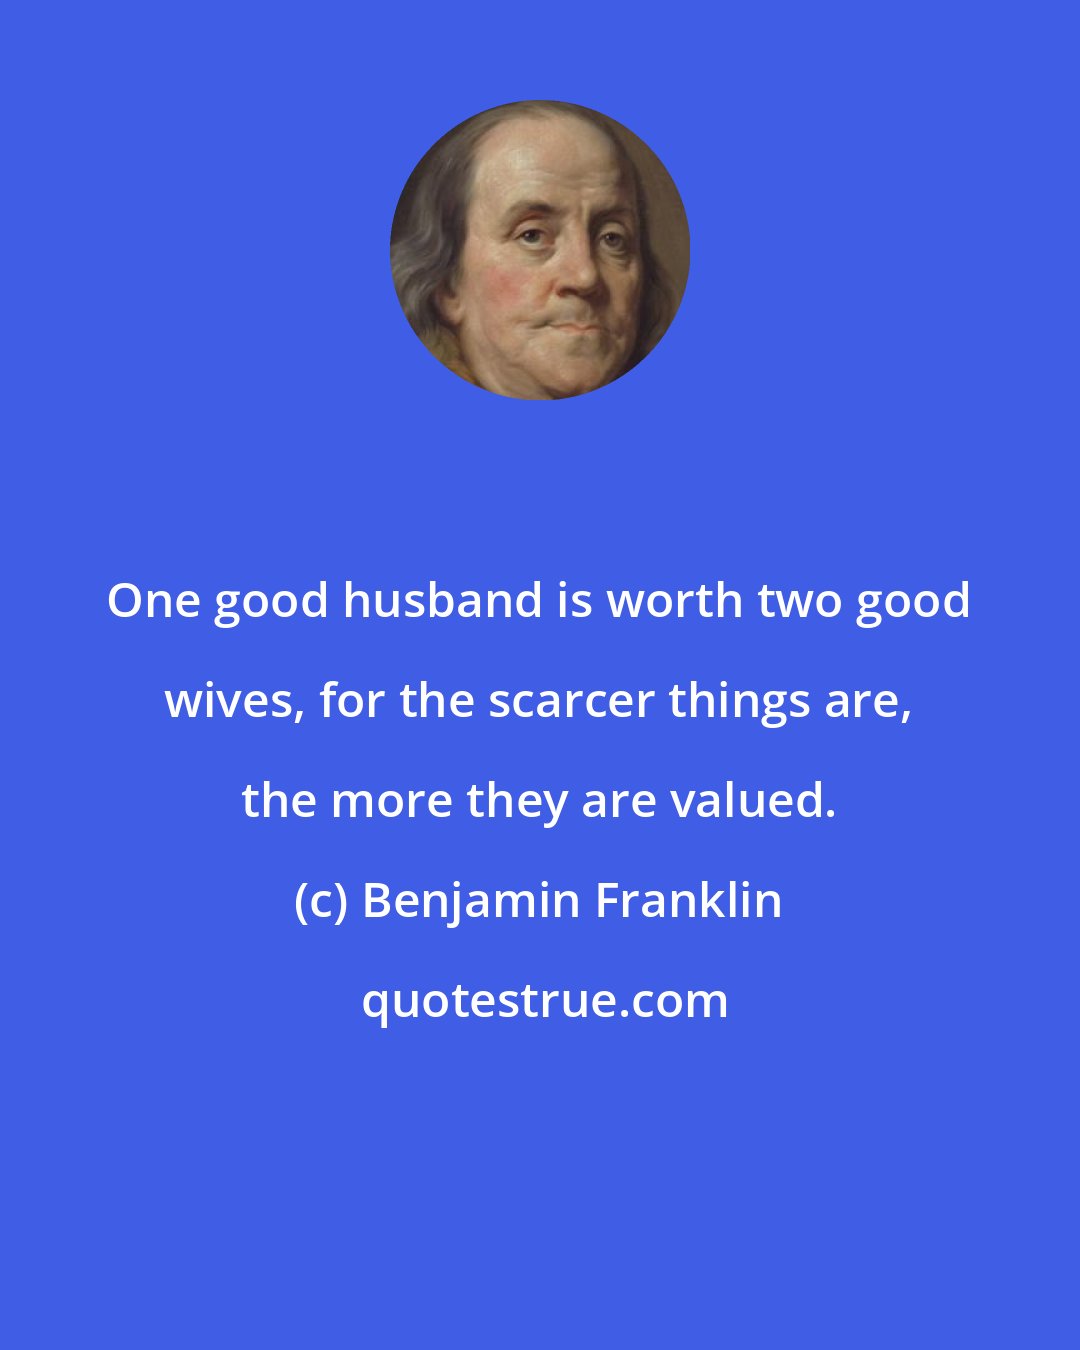 Benjamin Franklin: One good husband is worth two good wives, for the scarcer things are, the more they are valued.